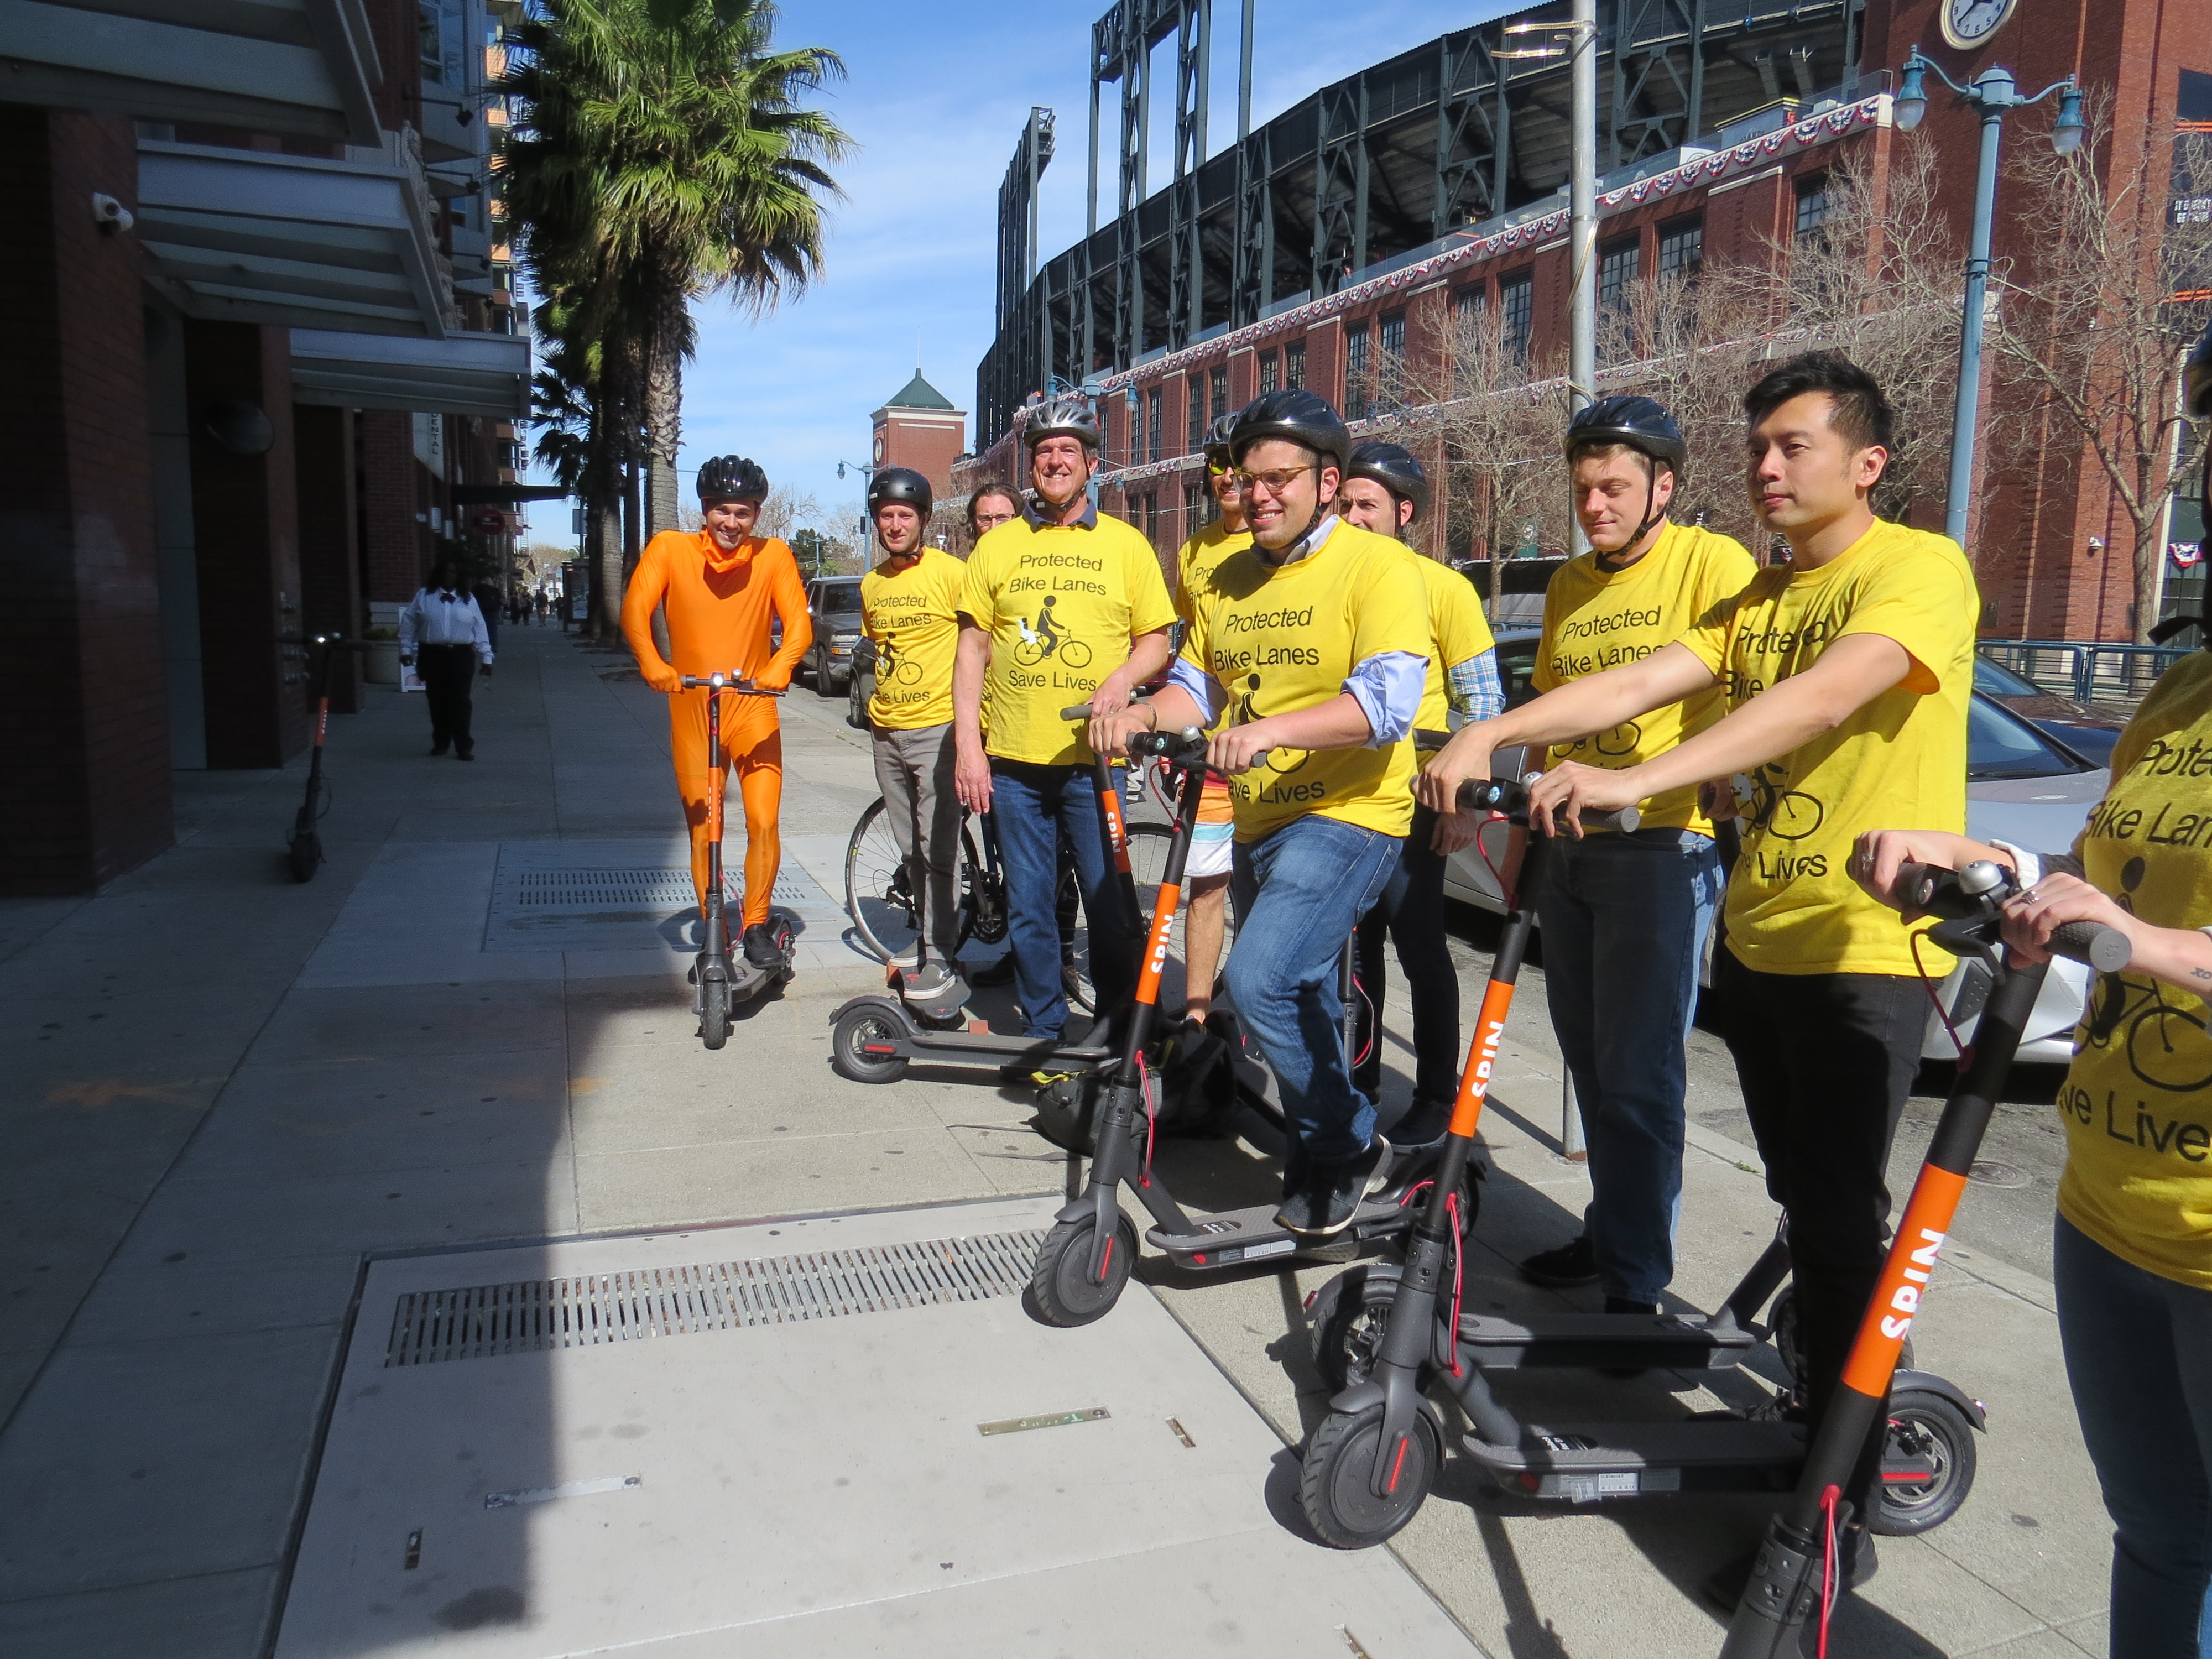 The scooters that pose a grave threat to San Francisco, flaunted in front of the baseball stadium. Photo: Luis Guerra